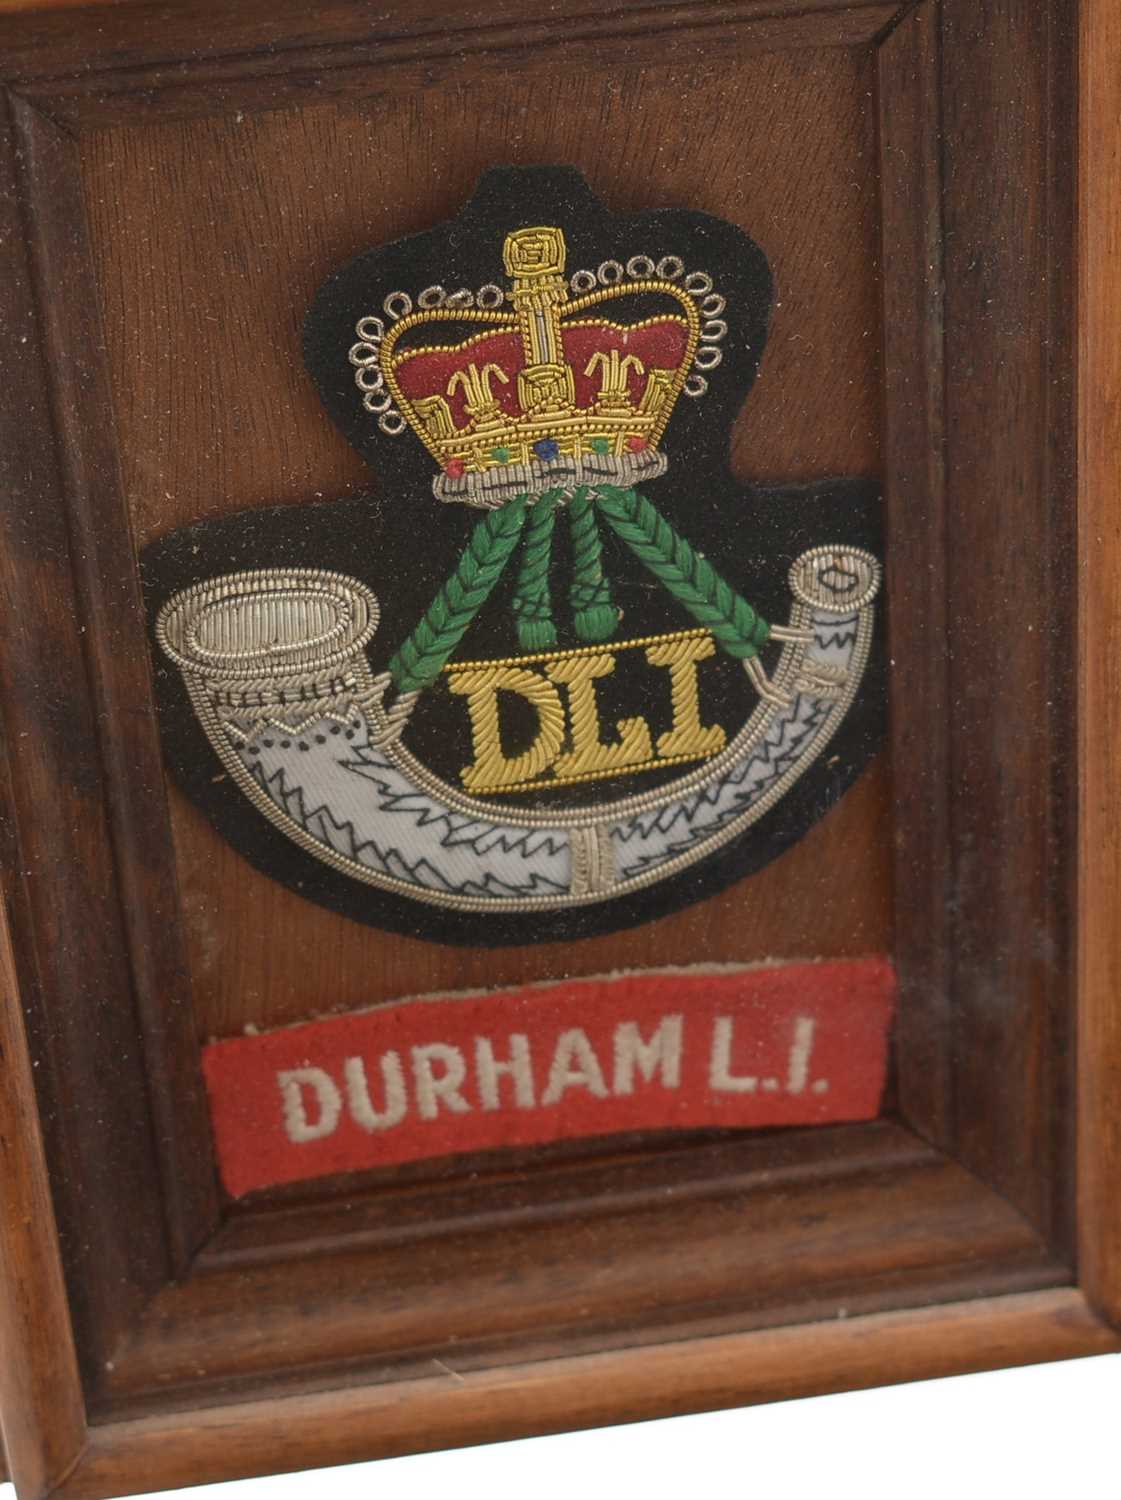 DLI interest caps and badges. - Image 13 of 13